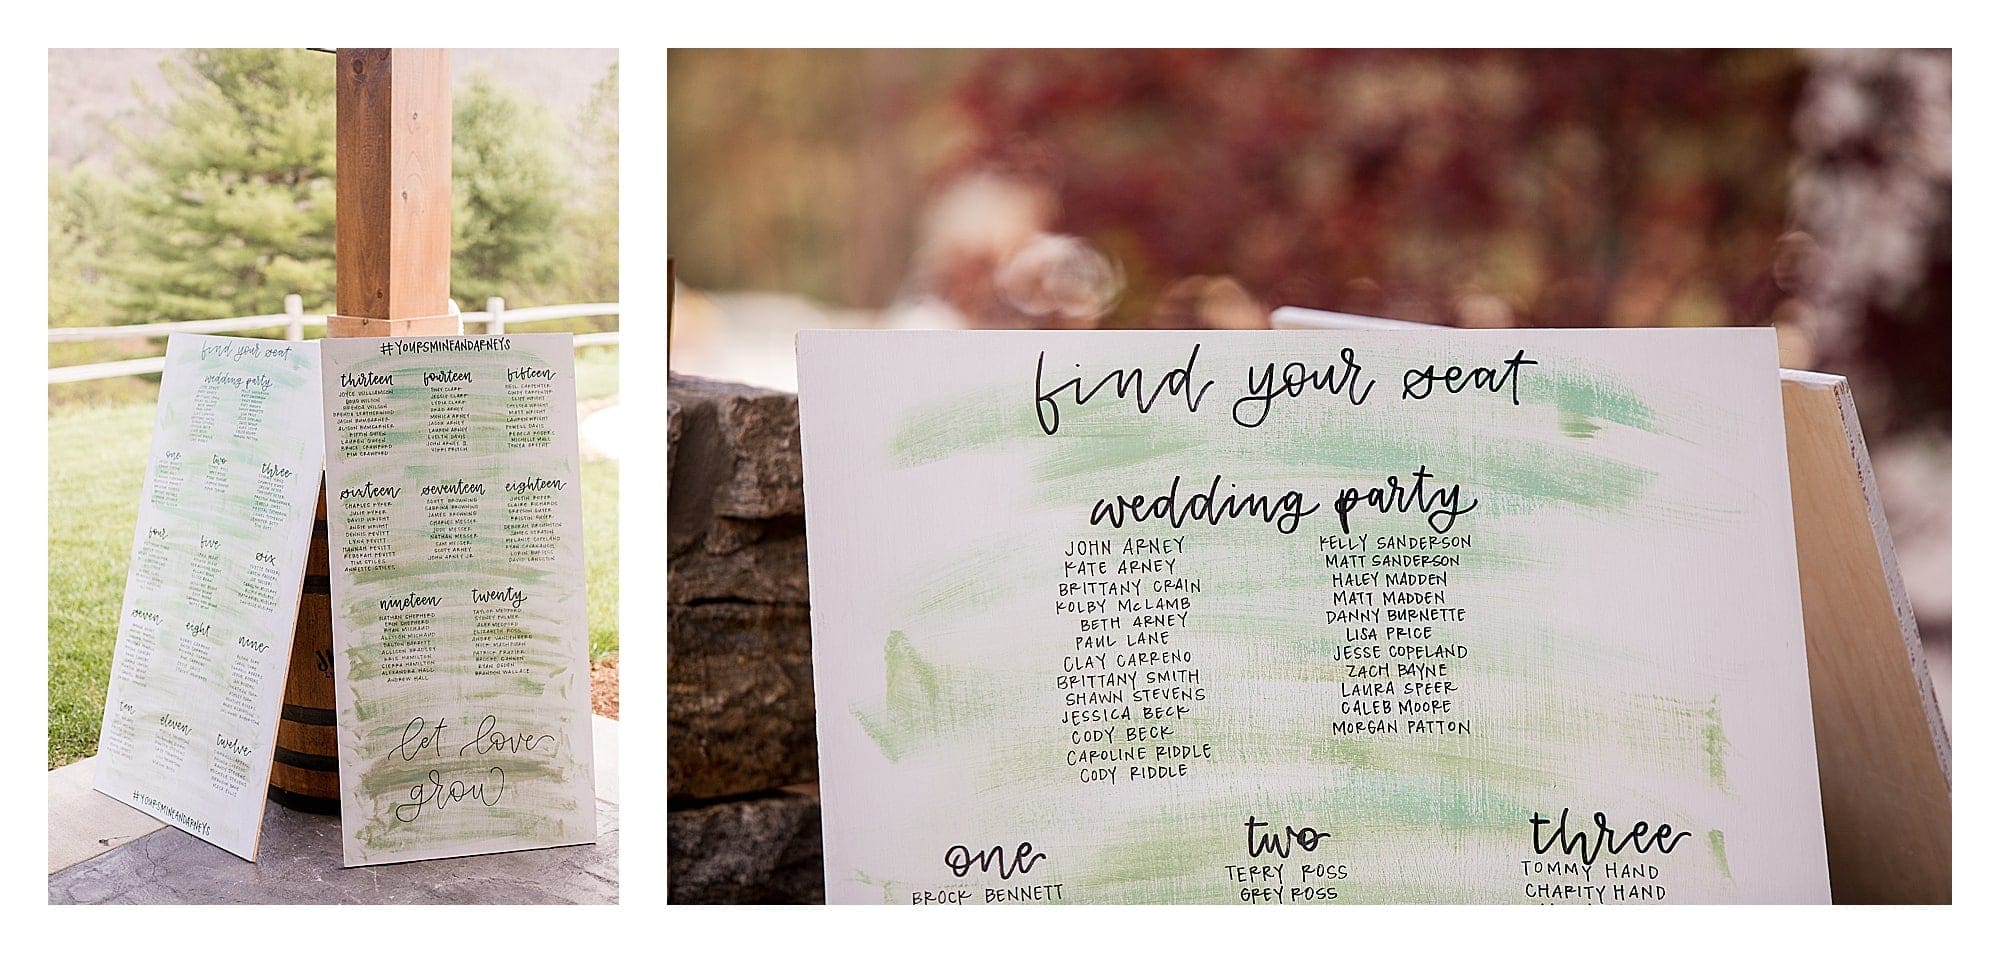 Wedding guest seating chart written in black calligraphy on white board with green watercolor paint wash photography by Kathy Beaver